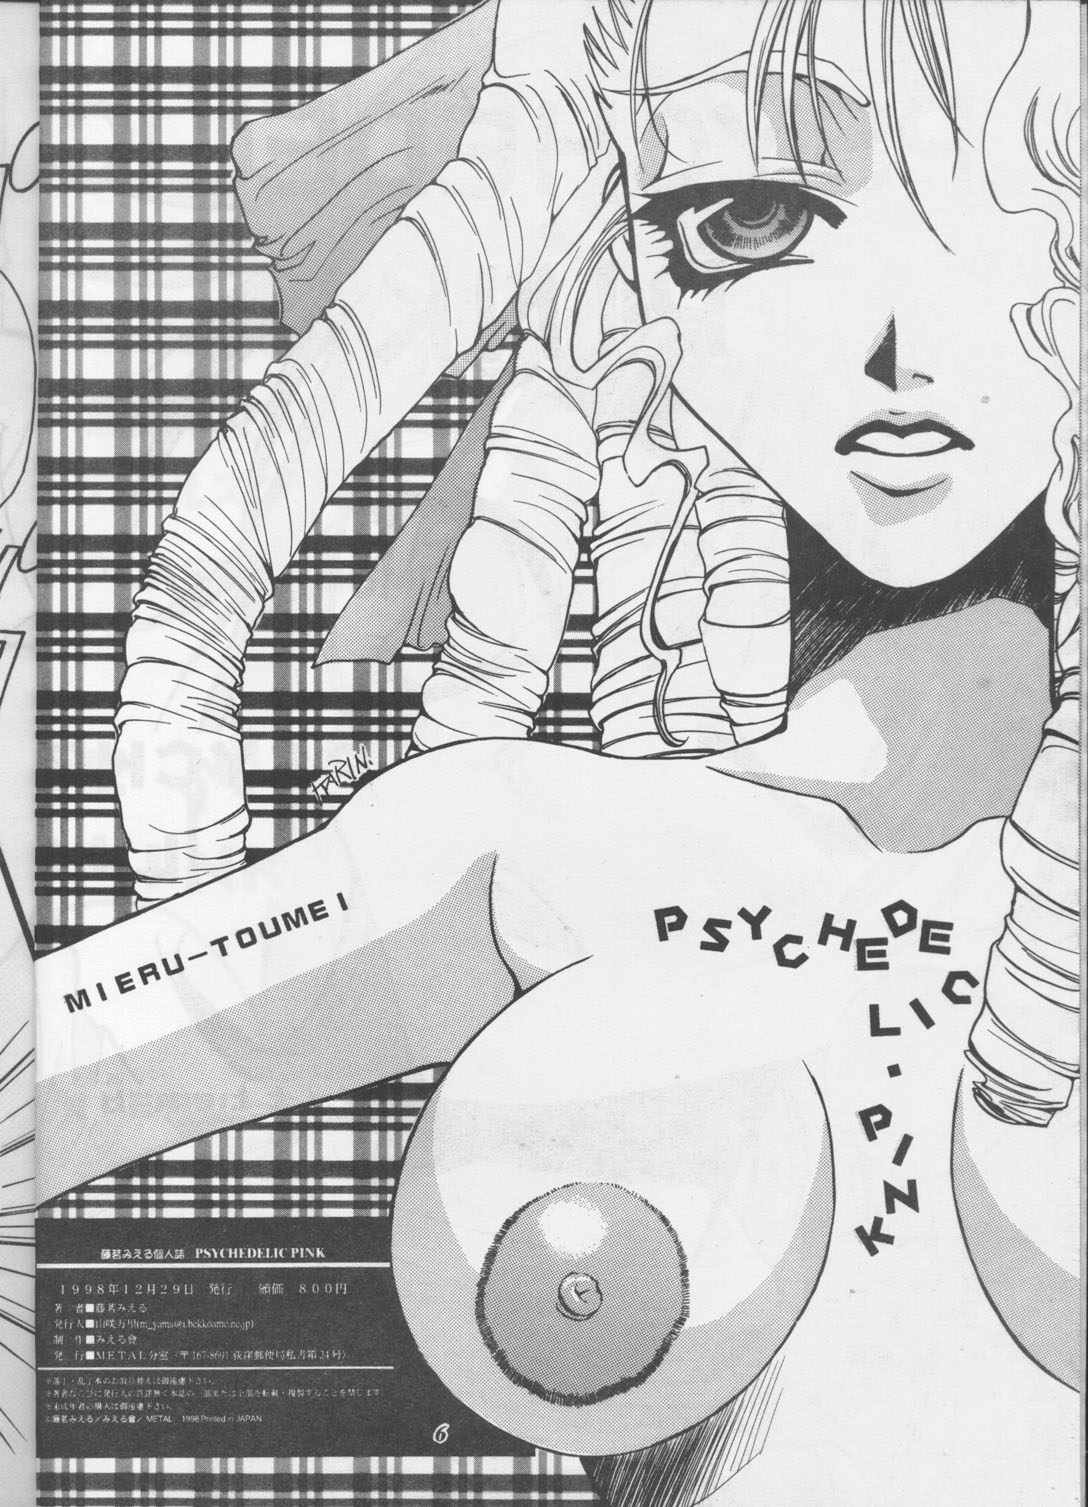 [Metal (Toumei Mieru)] PSYCHEDELIC PINK (Various) page 5 full